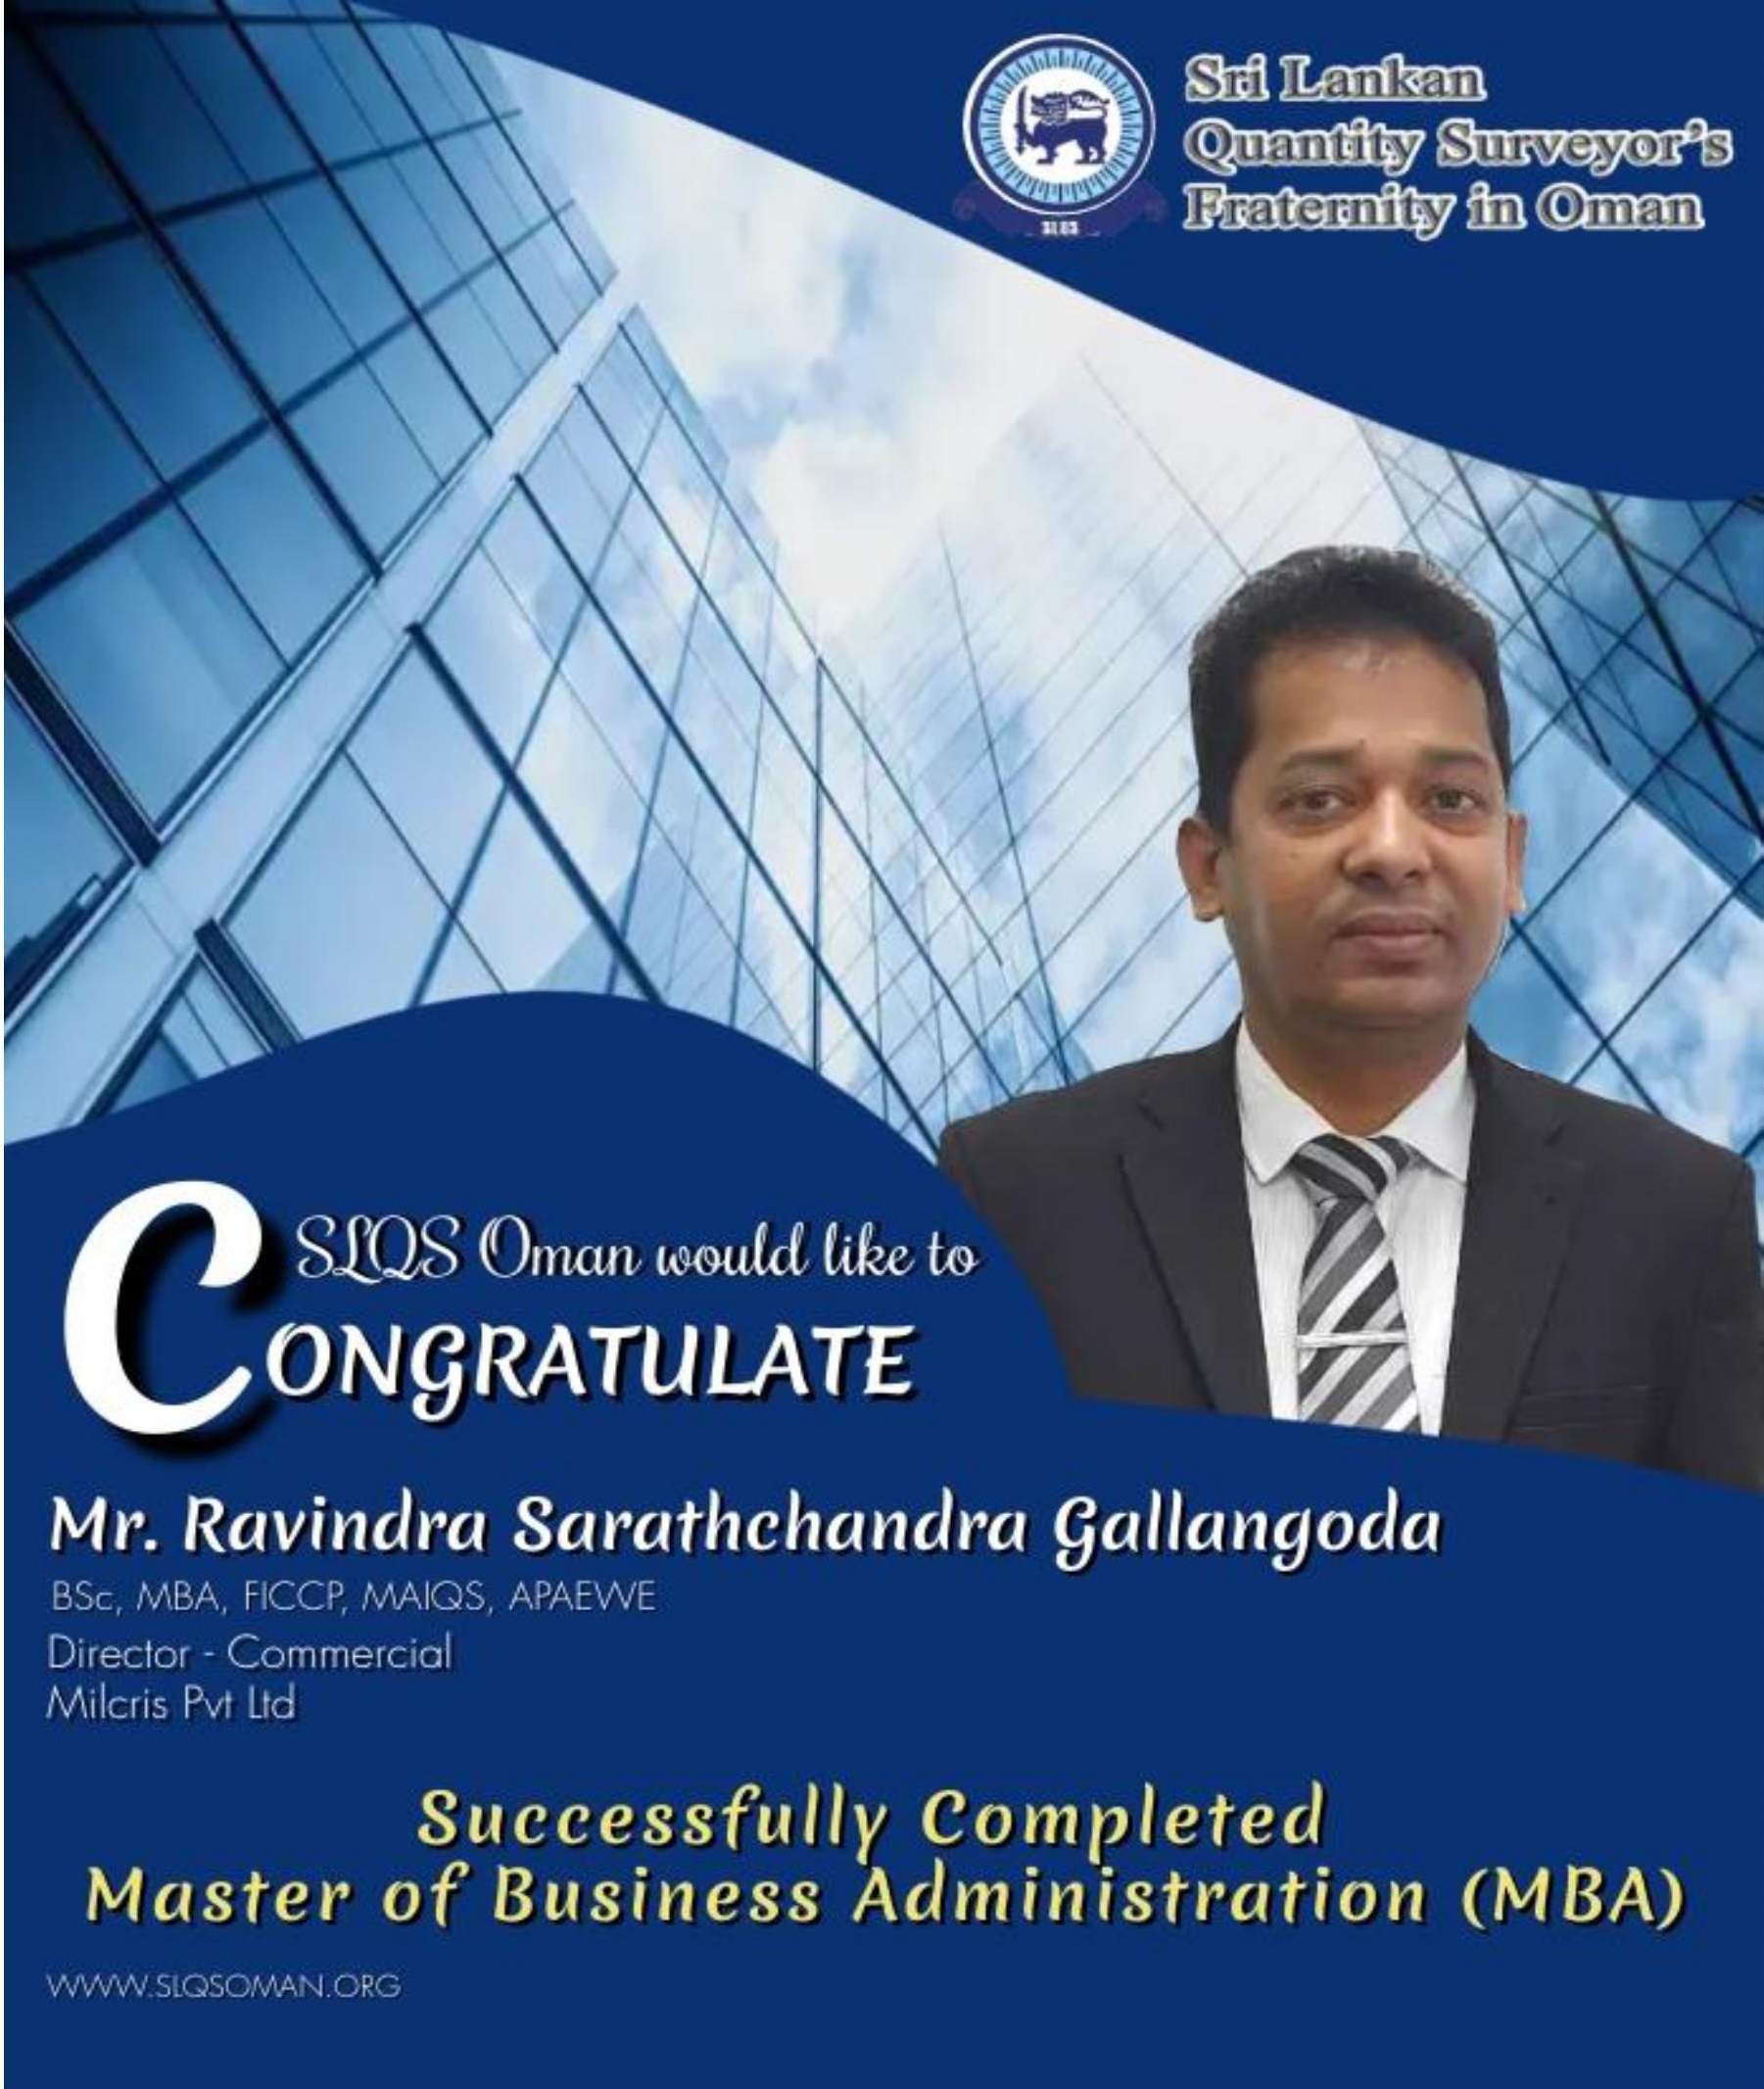 Congratulations!! Mr. Ravindra Gallangoda!! For successfully completion of MBA.